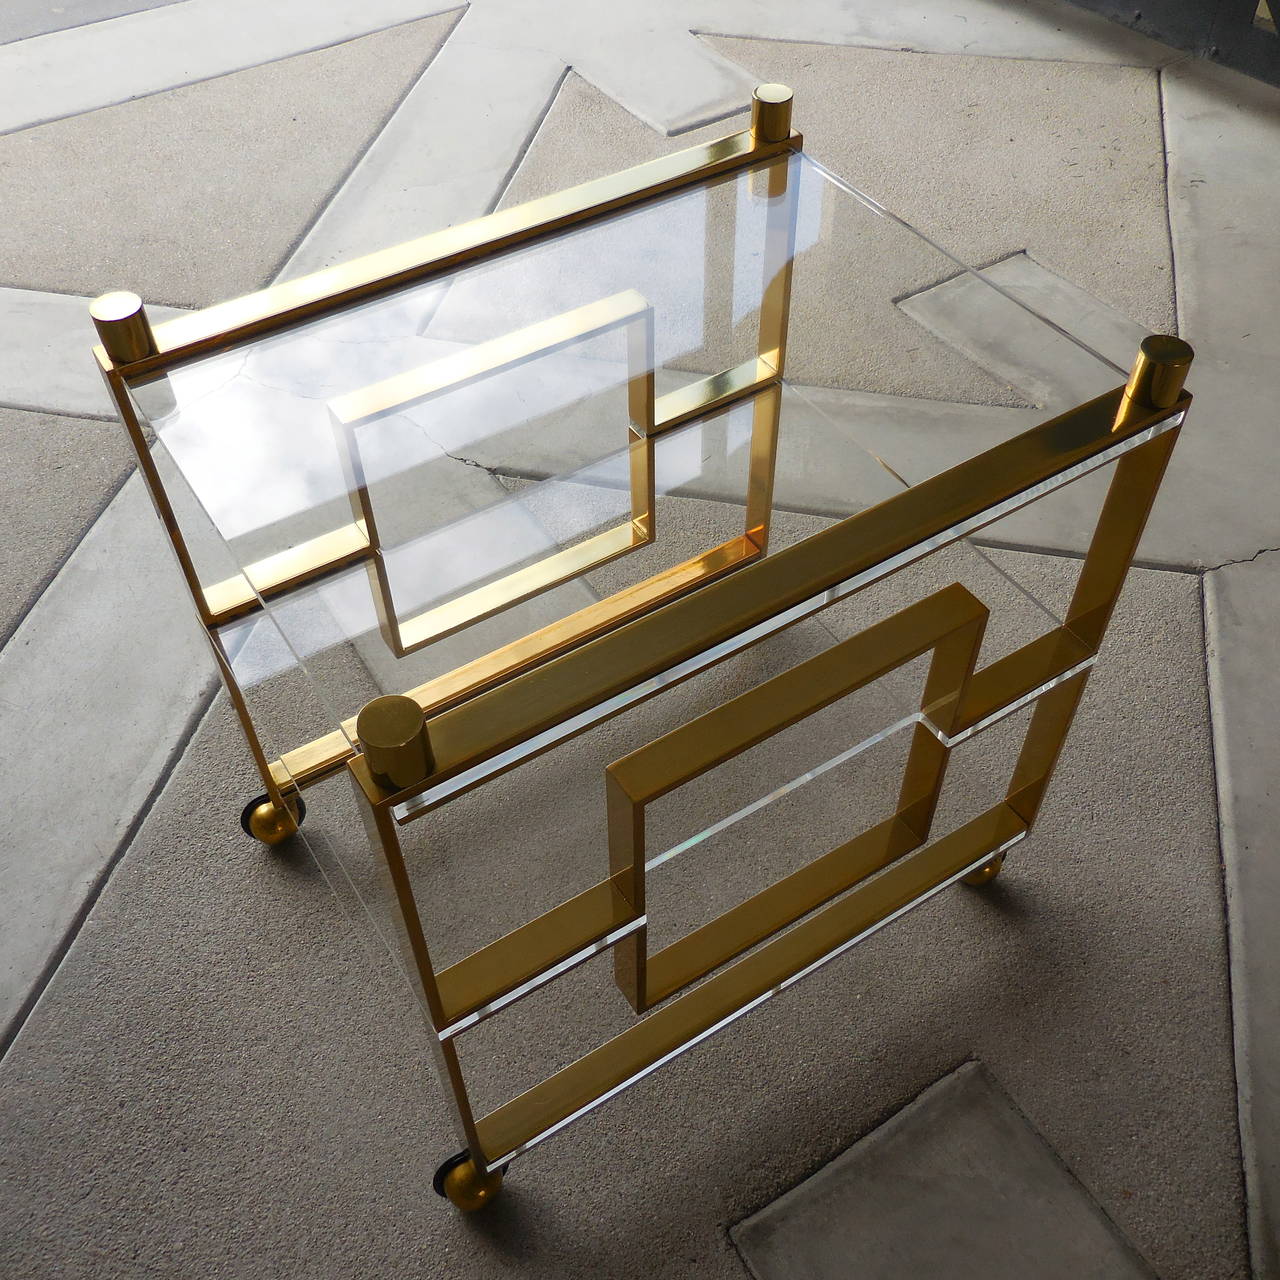 A glamorous bar or serving cart, composed of brass-plated, solid flat-bar steel and Lucite, by legendary designer Charles Hollis Jones. This cart was created specifically for Christopher Anthony Ltd and was part of the collection that Mr. Jones